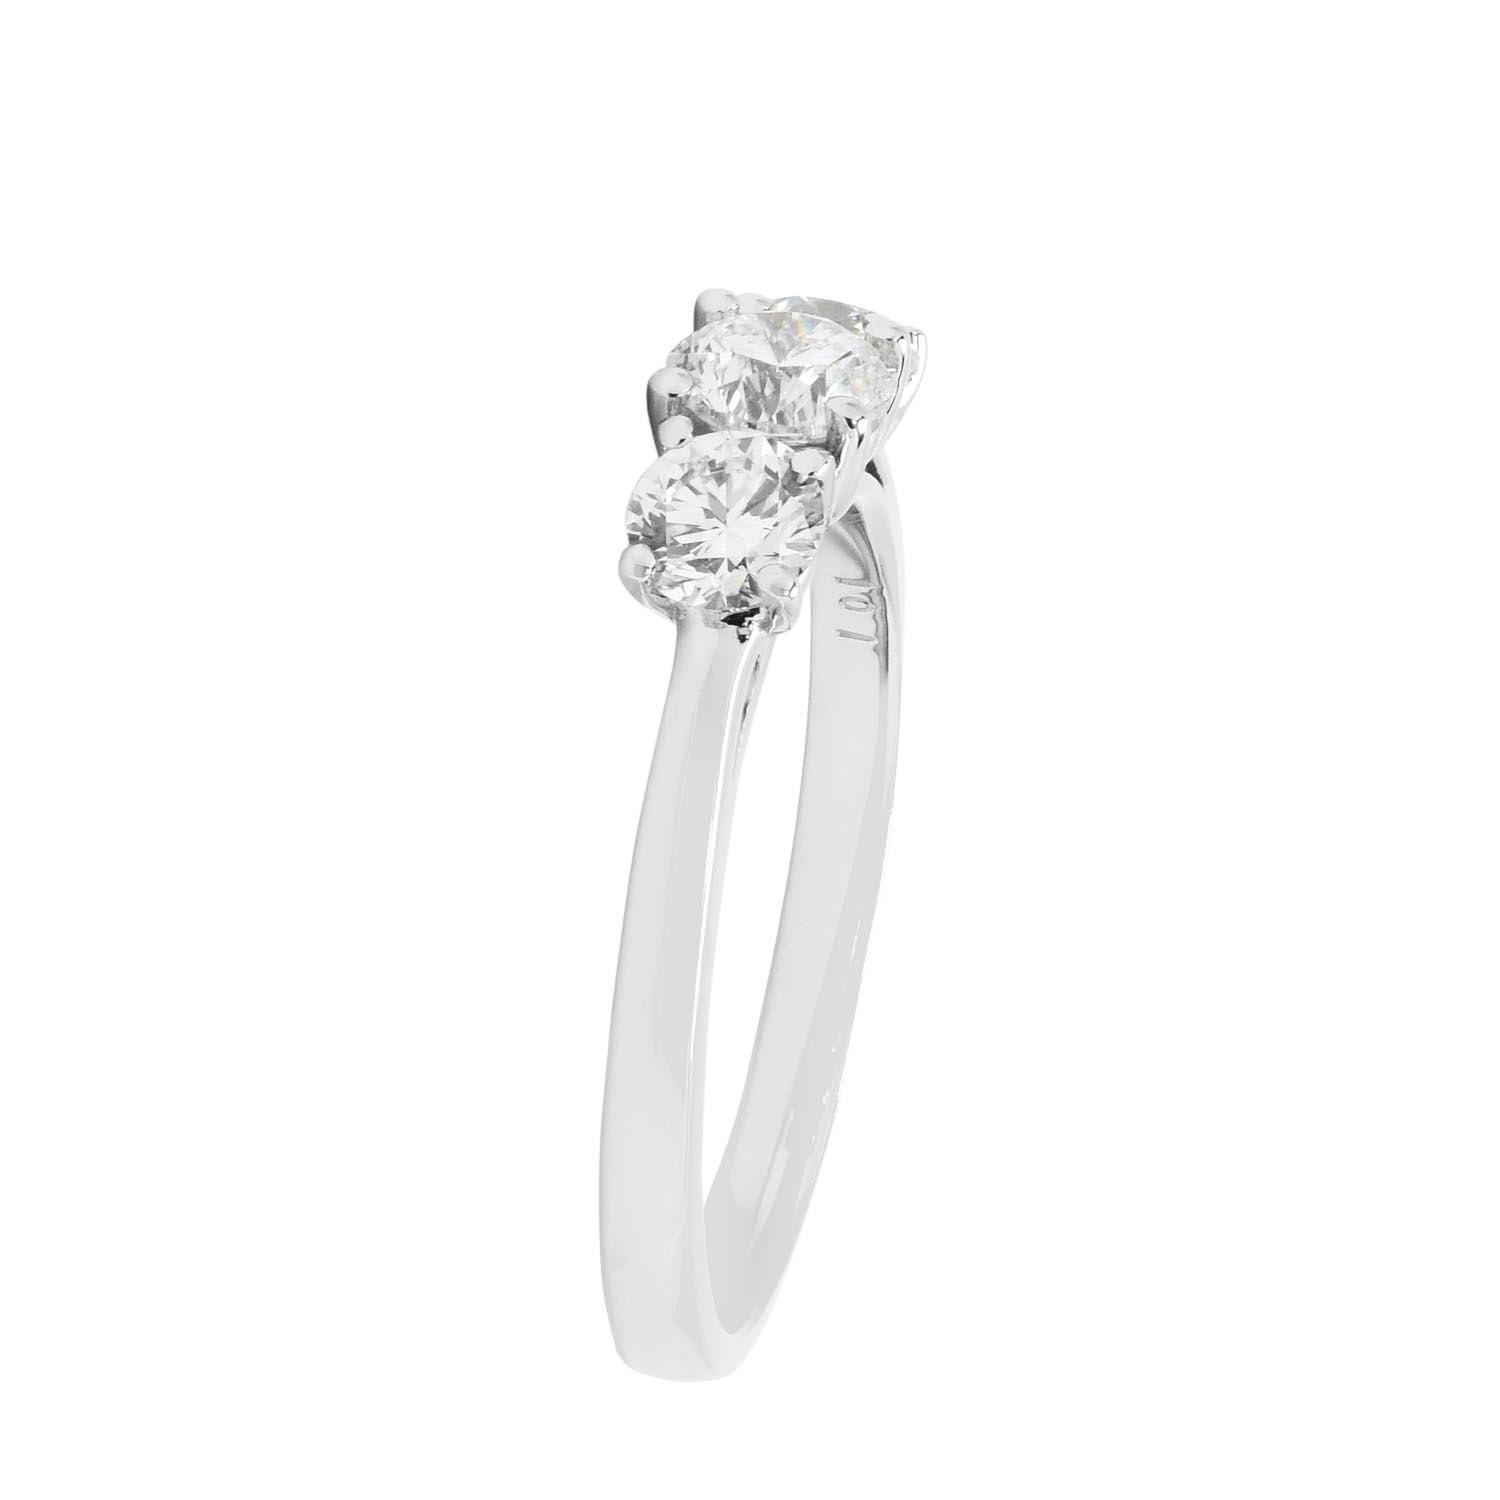 Diamond Three Stone Engagement Ring in 14kt White Gold (1ct tw)